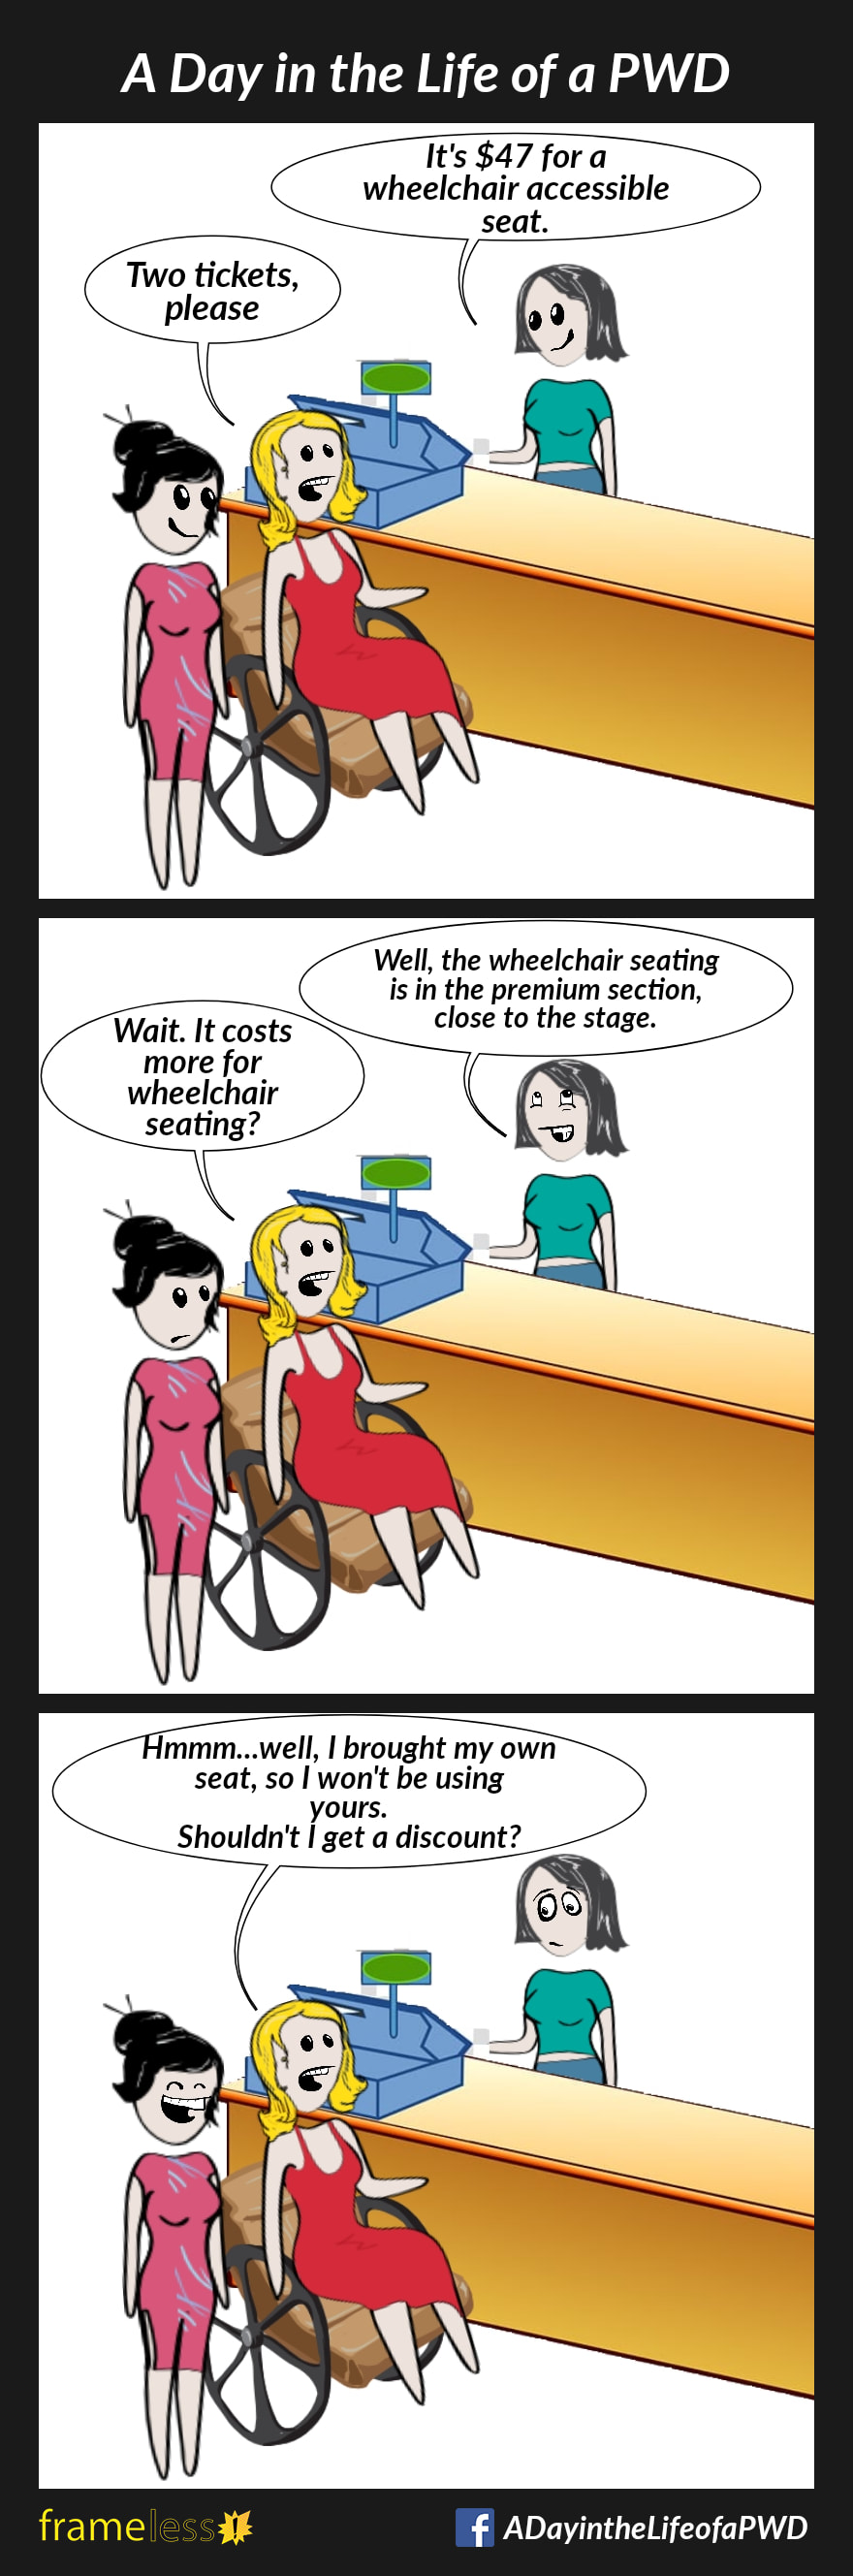 COMIC STRIP 
A Day in the Life of a PWD (Person With a Disability) 

Frame 1:
A woman in a wheelchair and her friend are at a ticket counter.
WOMAN: Two tickets please
CASHIER: It's $47 for a wheelchair accessible seat

Frame 2:
WOMAN: Wait. It costs more for wheelchair seating?
CASHIER: Well, the wheelchair seating is in the premium section, close to the stage.

Frame 3:
WOMAN: Hmmm...well, I brought my own seat, so I won't be using yours. Shouldn't I get a discount?